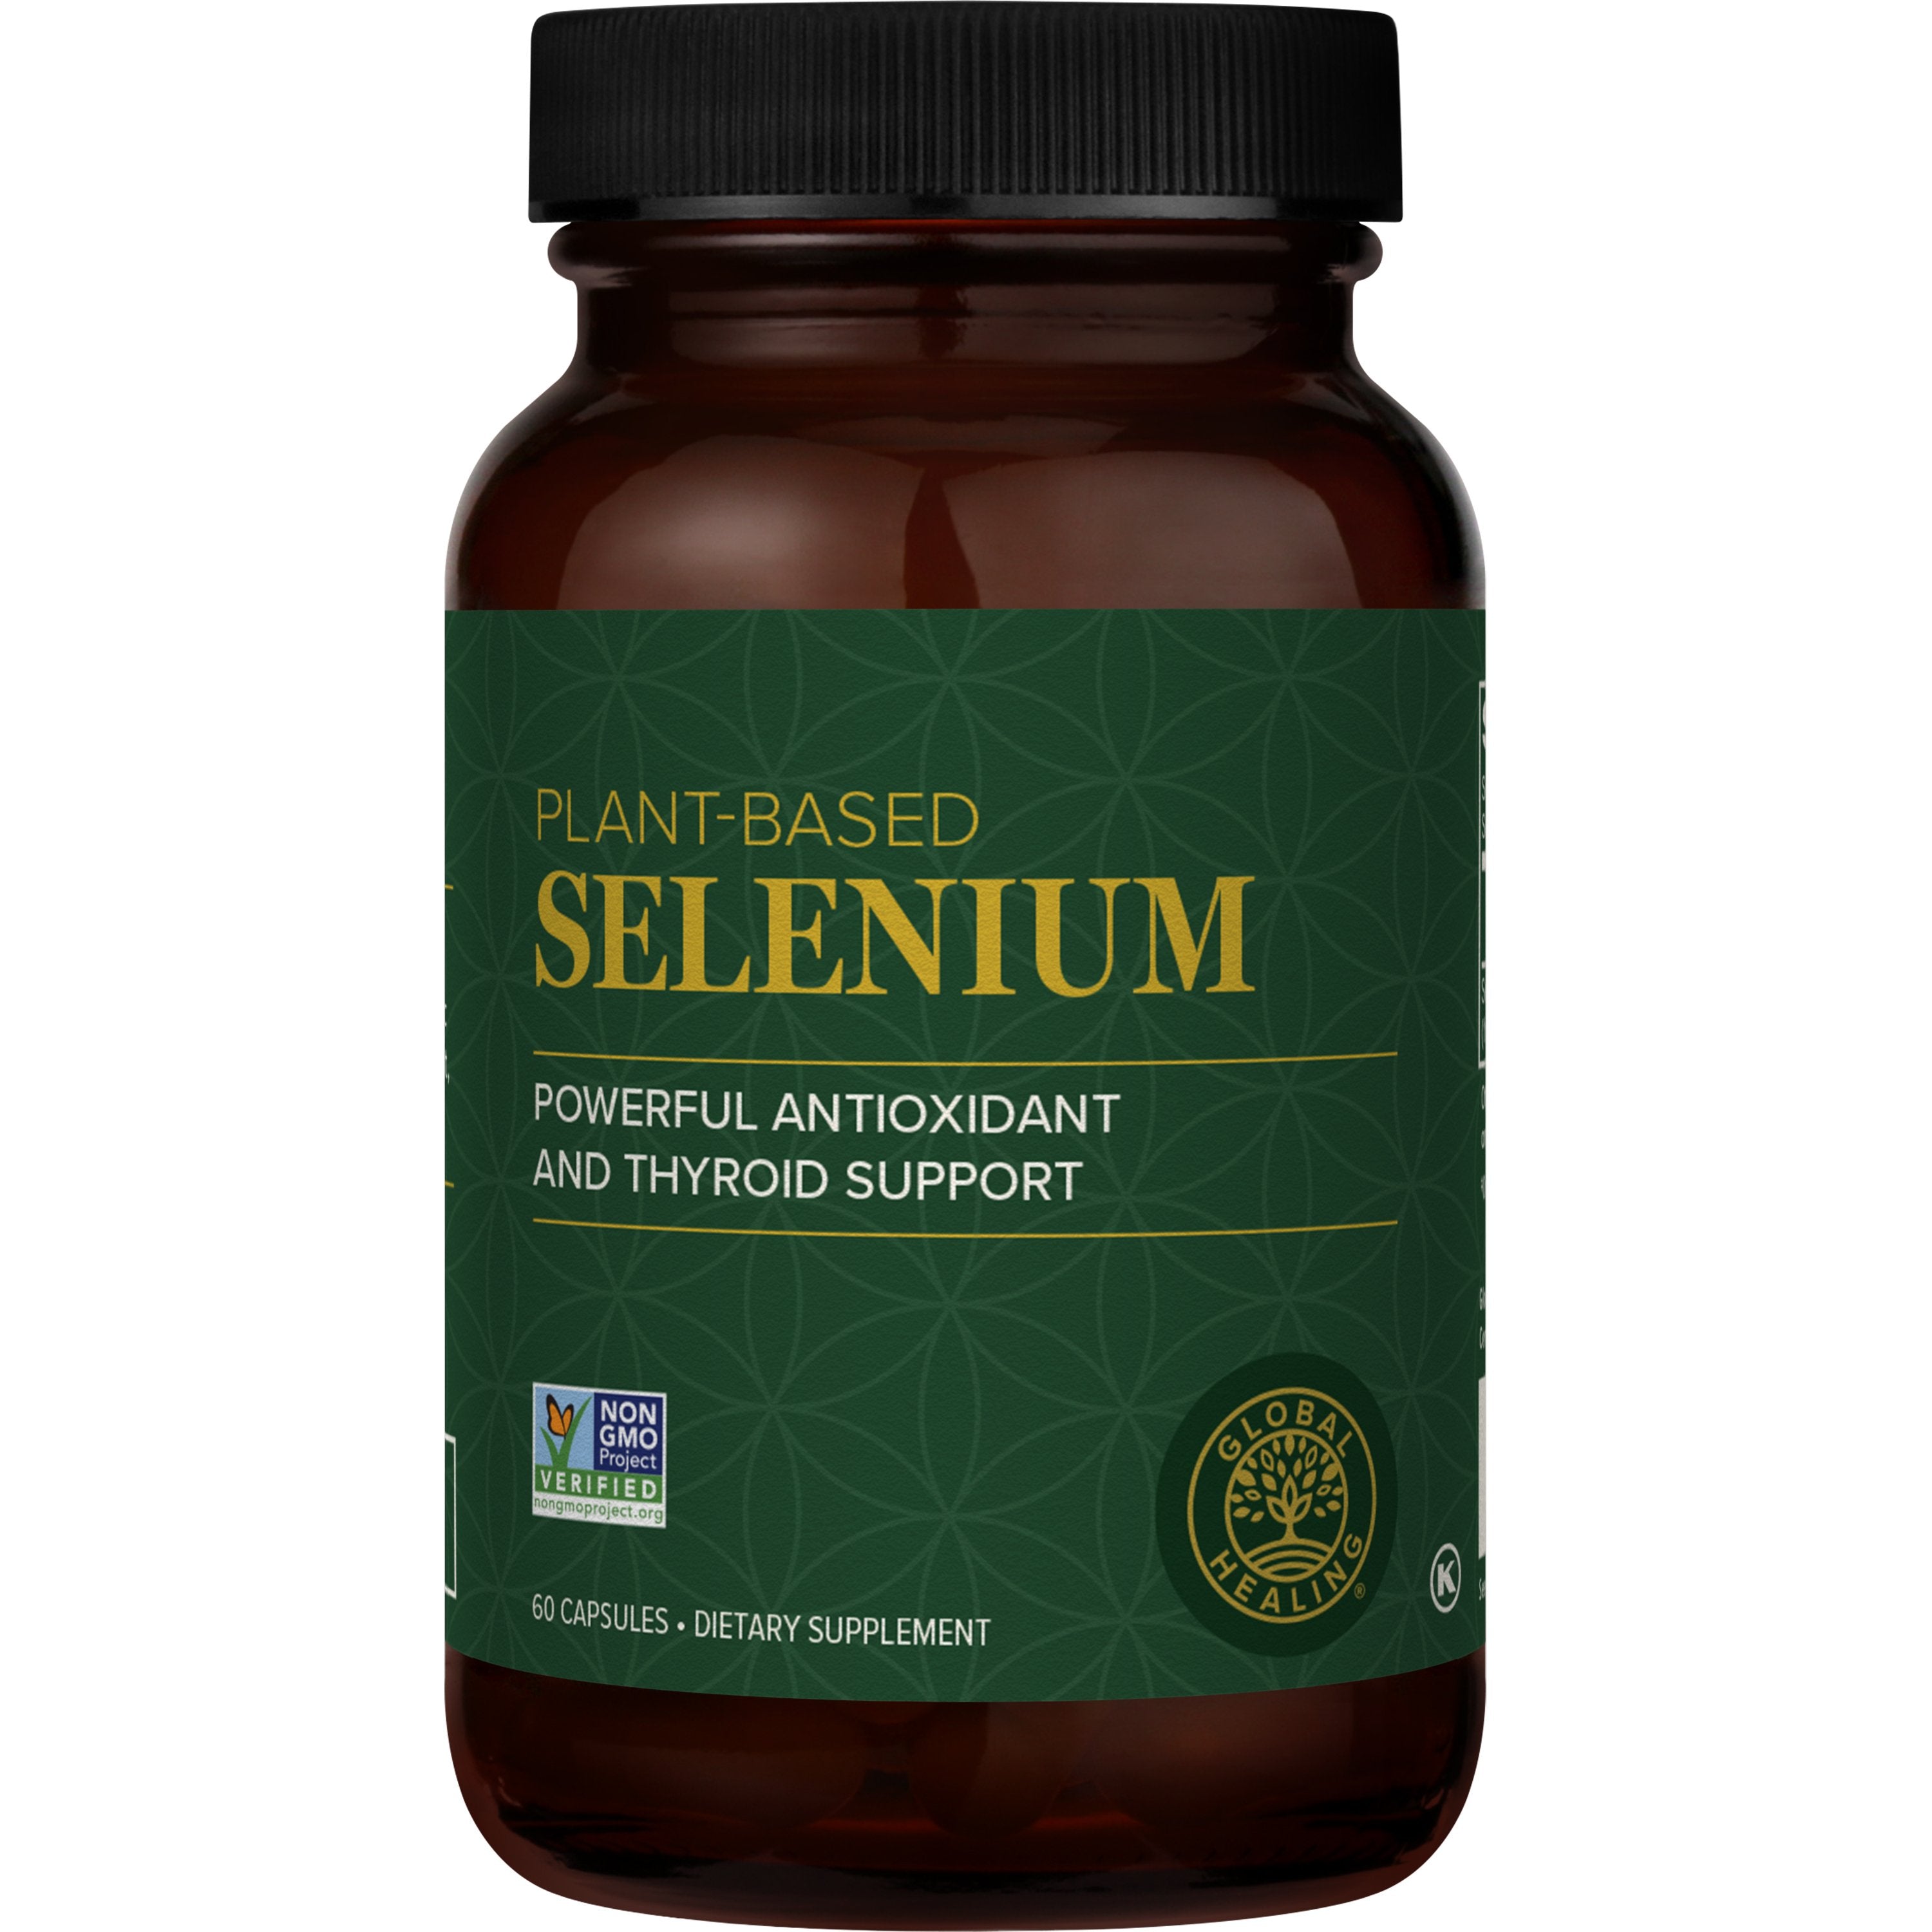 A Vegan Selenium From Organic Mustard Seed bottle for thyroid support.